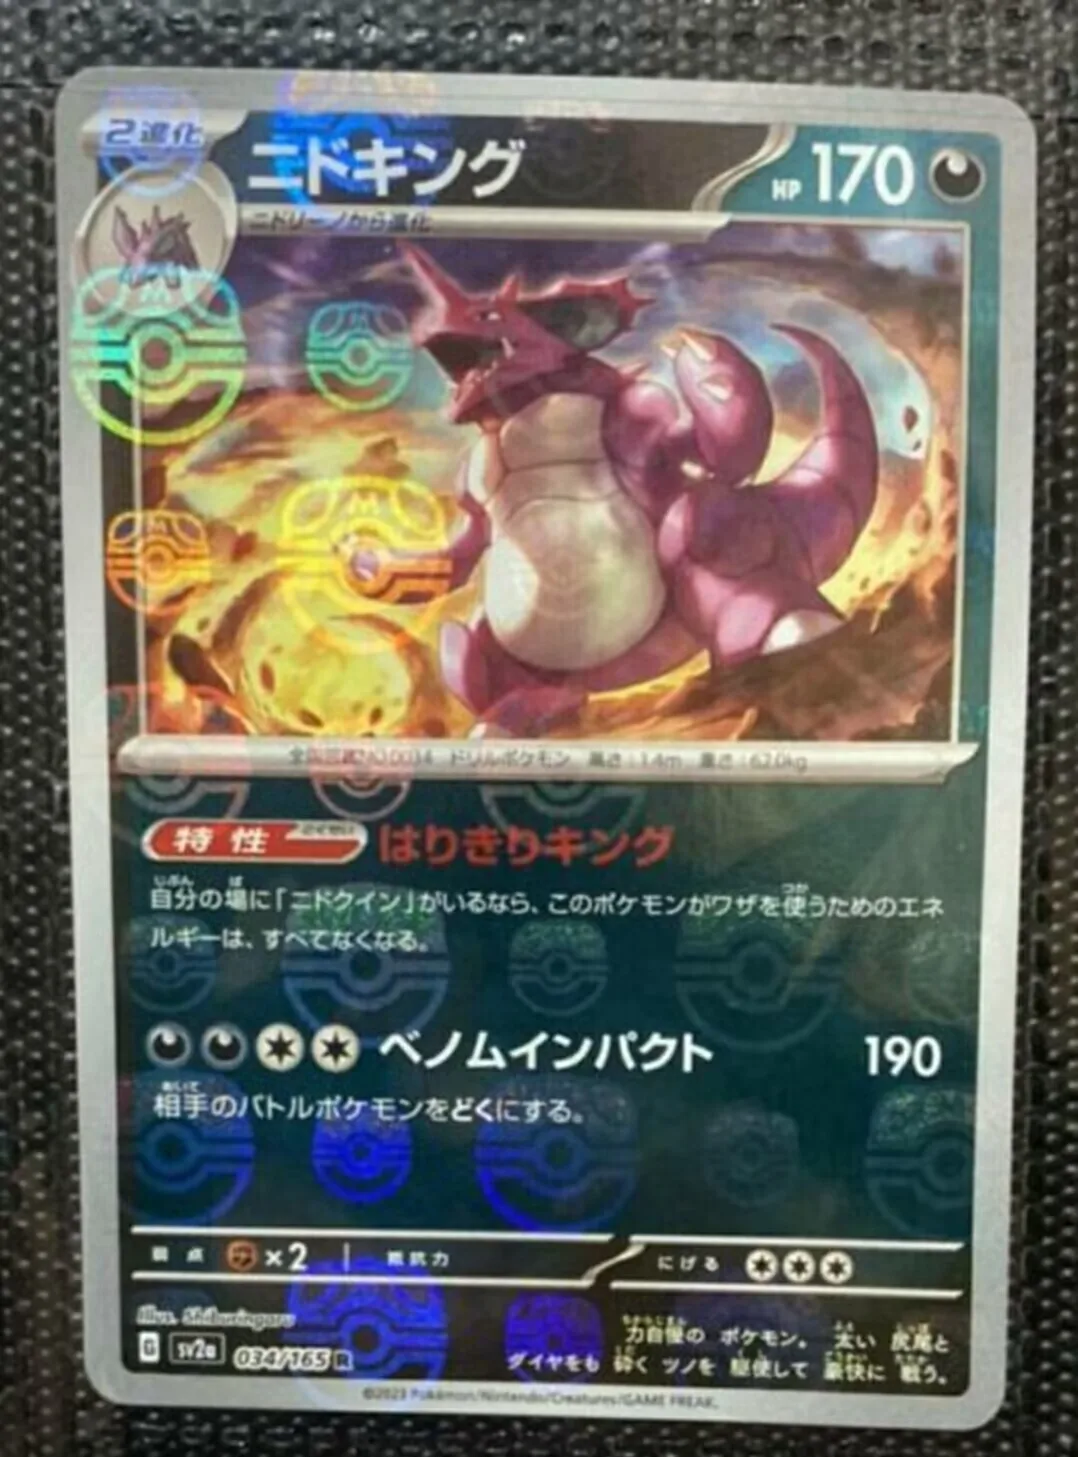 

PTCG Pokemon Card SV2a 034/165 MASTER BALL Nidoking Scarlet & Violet 151 Collection Mint Card